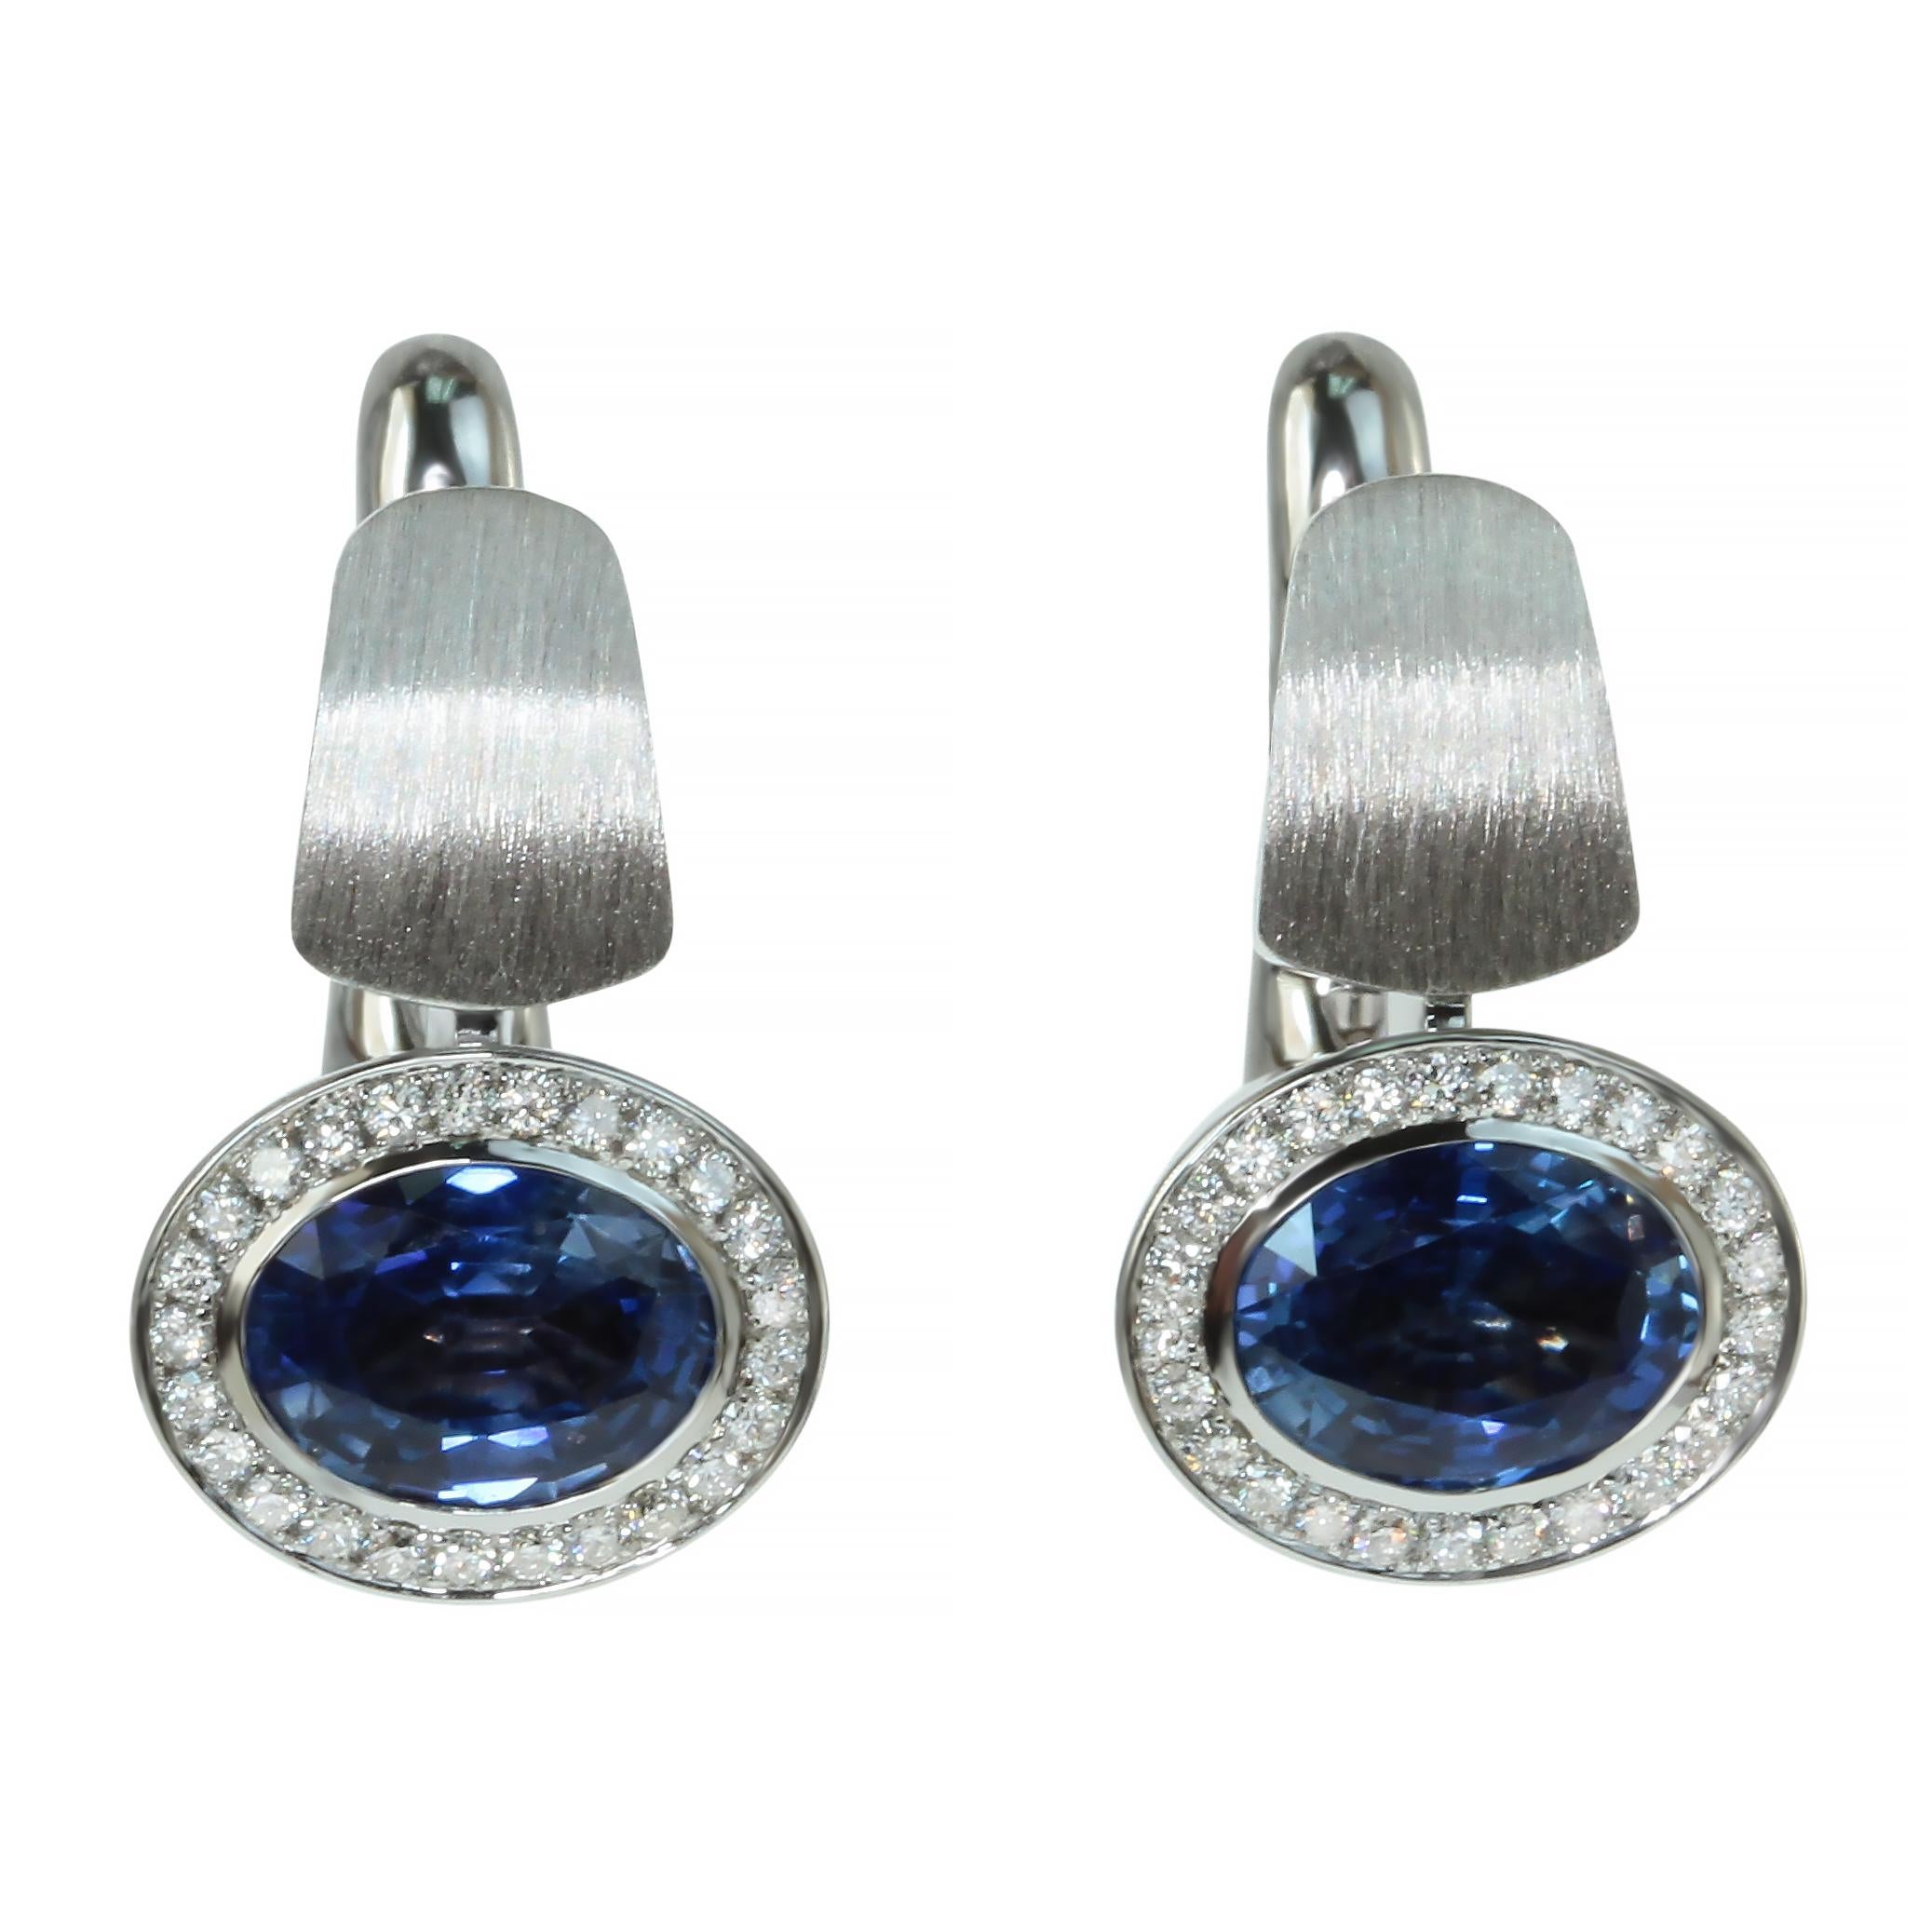 Blue Sapphire Diamonds Colored Enamel 18 Karat White Gold Kaleidoscope Earrings

Please take a look at one of our trade mark texture in Kaleidoscope Collection - 